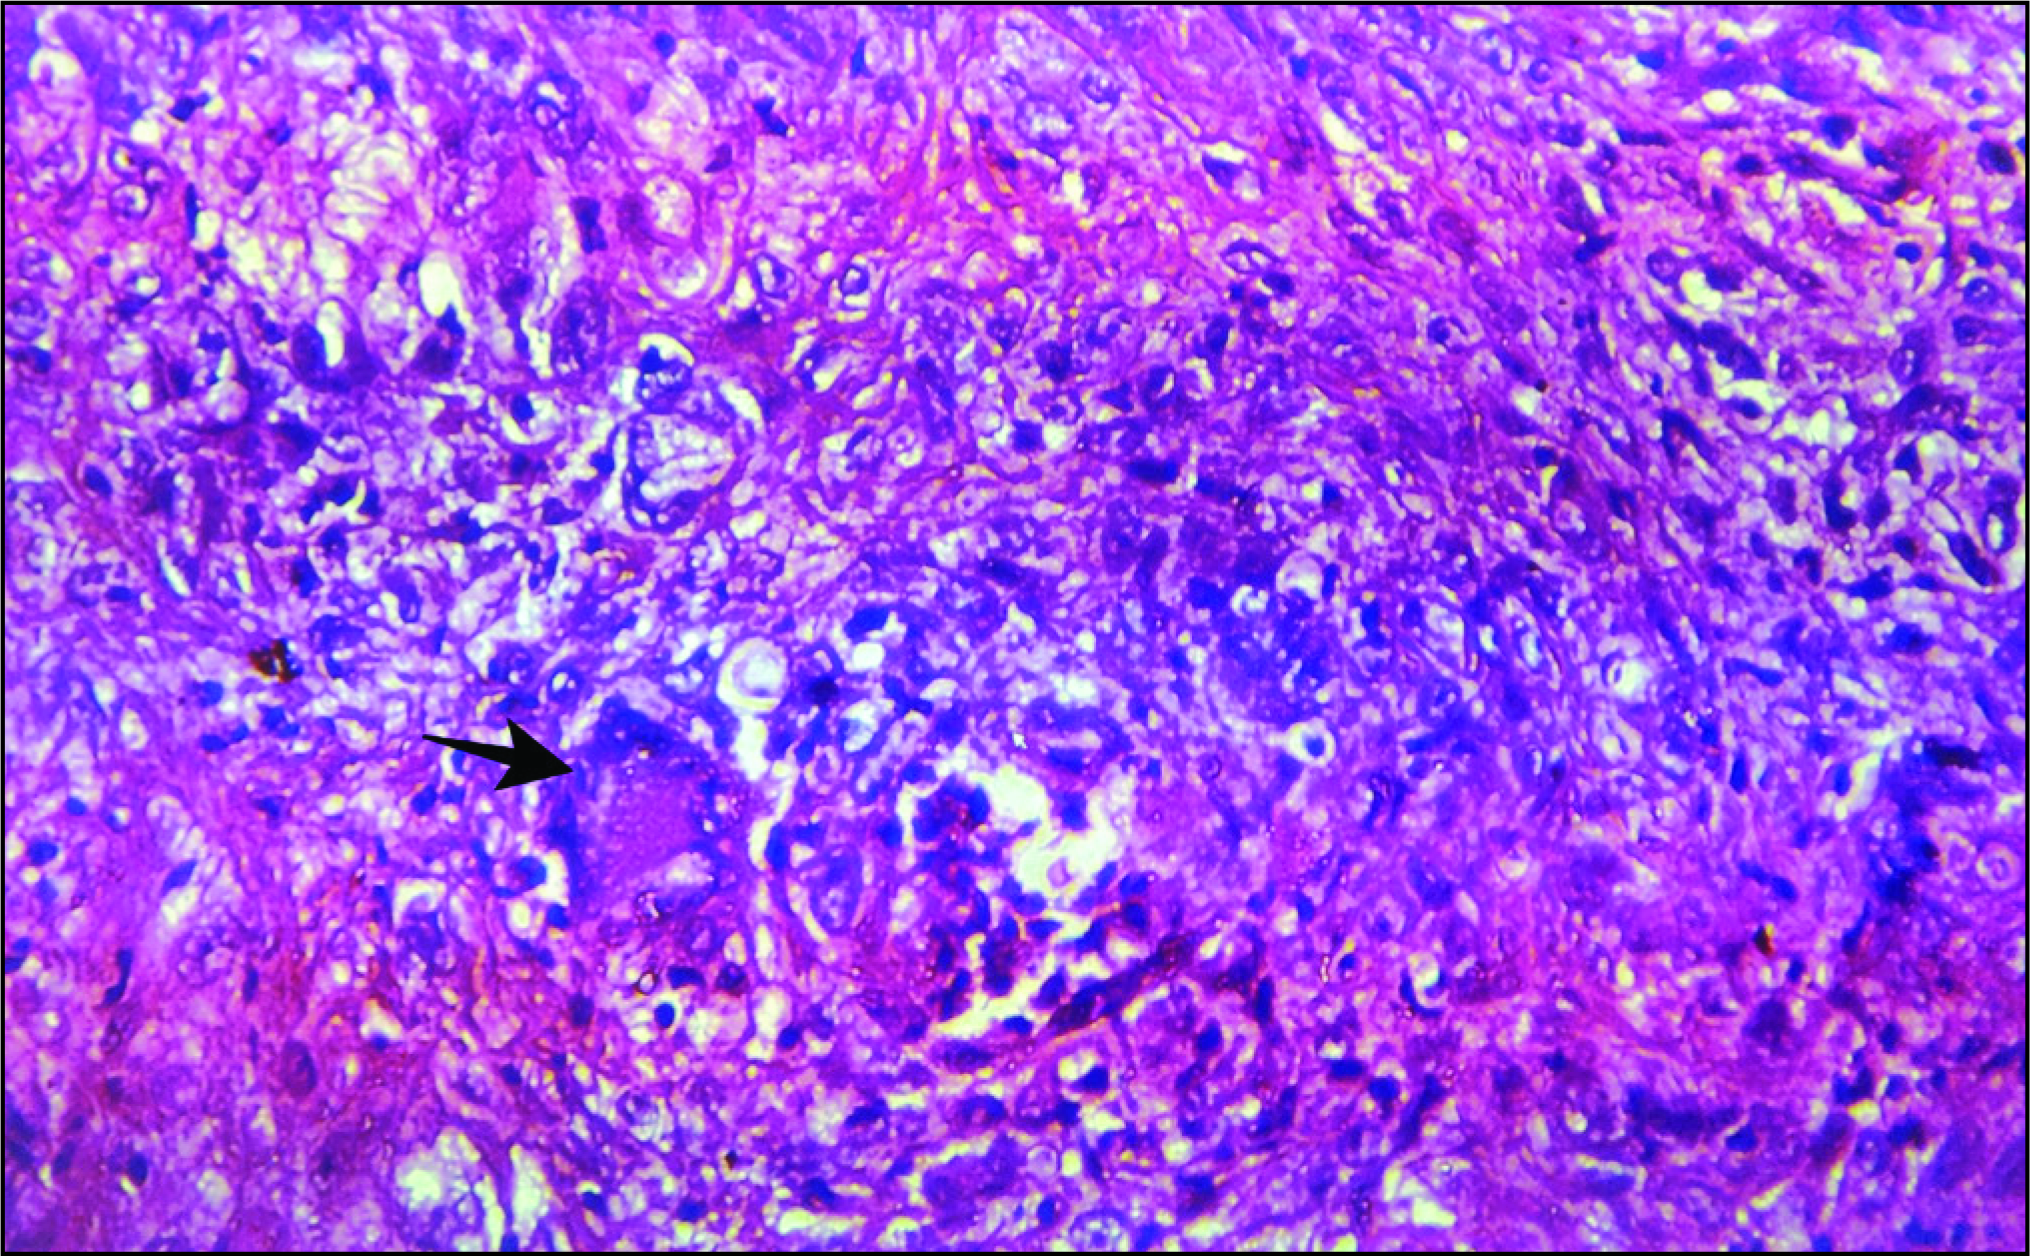 Cellular infiltrate with giant cell (indicated by arrow), epithelioid cells and lymphocytes (H &E, 400x).